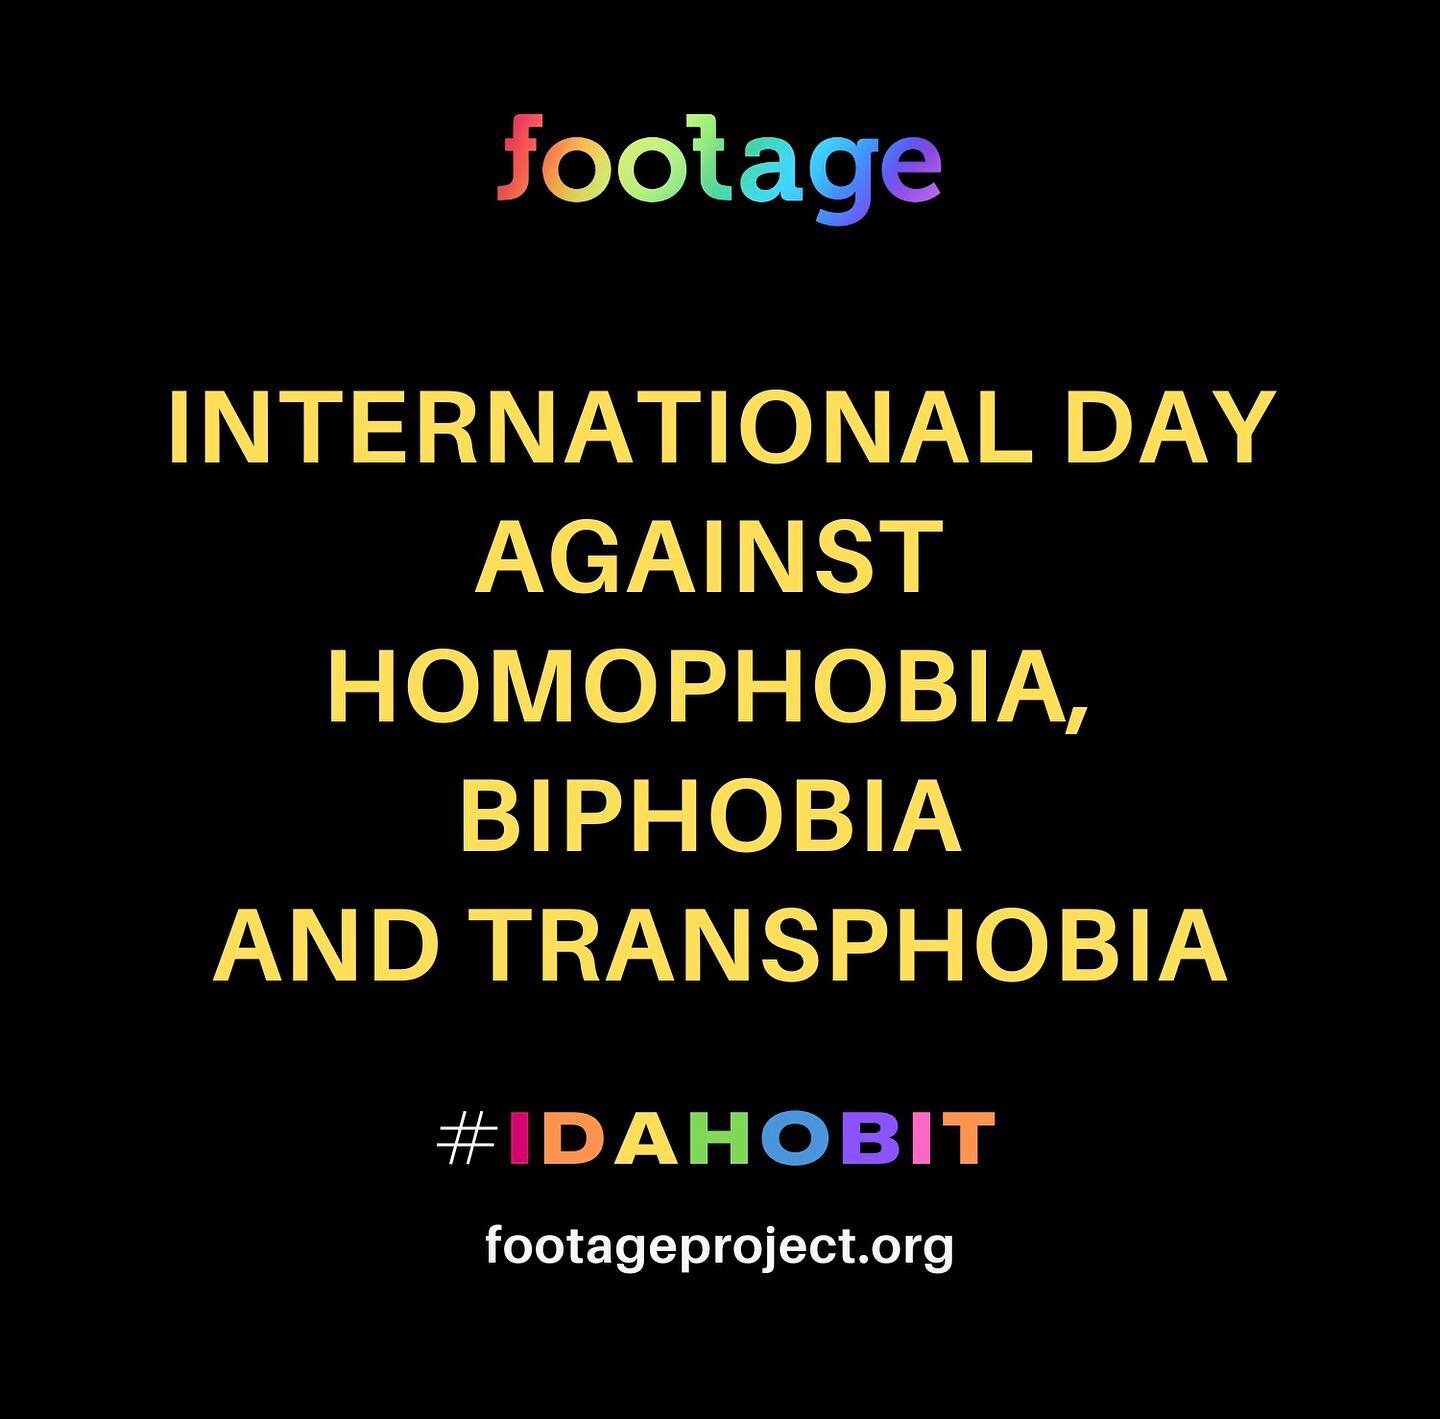 Today May 17th, 2015 is International Day against Homophobia, Biphobia and Transphobia - IDAHOBIT.  At Footage we stand with and celebrate ALL members of the global LGBTQIA community against hatred, violence and discrimination. Through compassion and